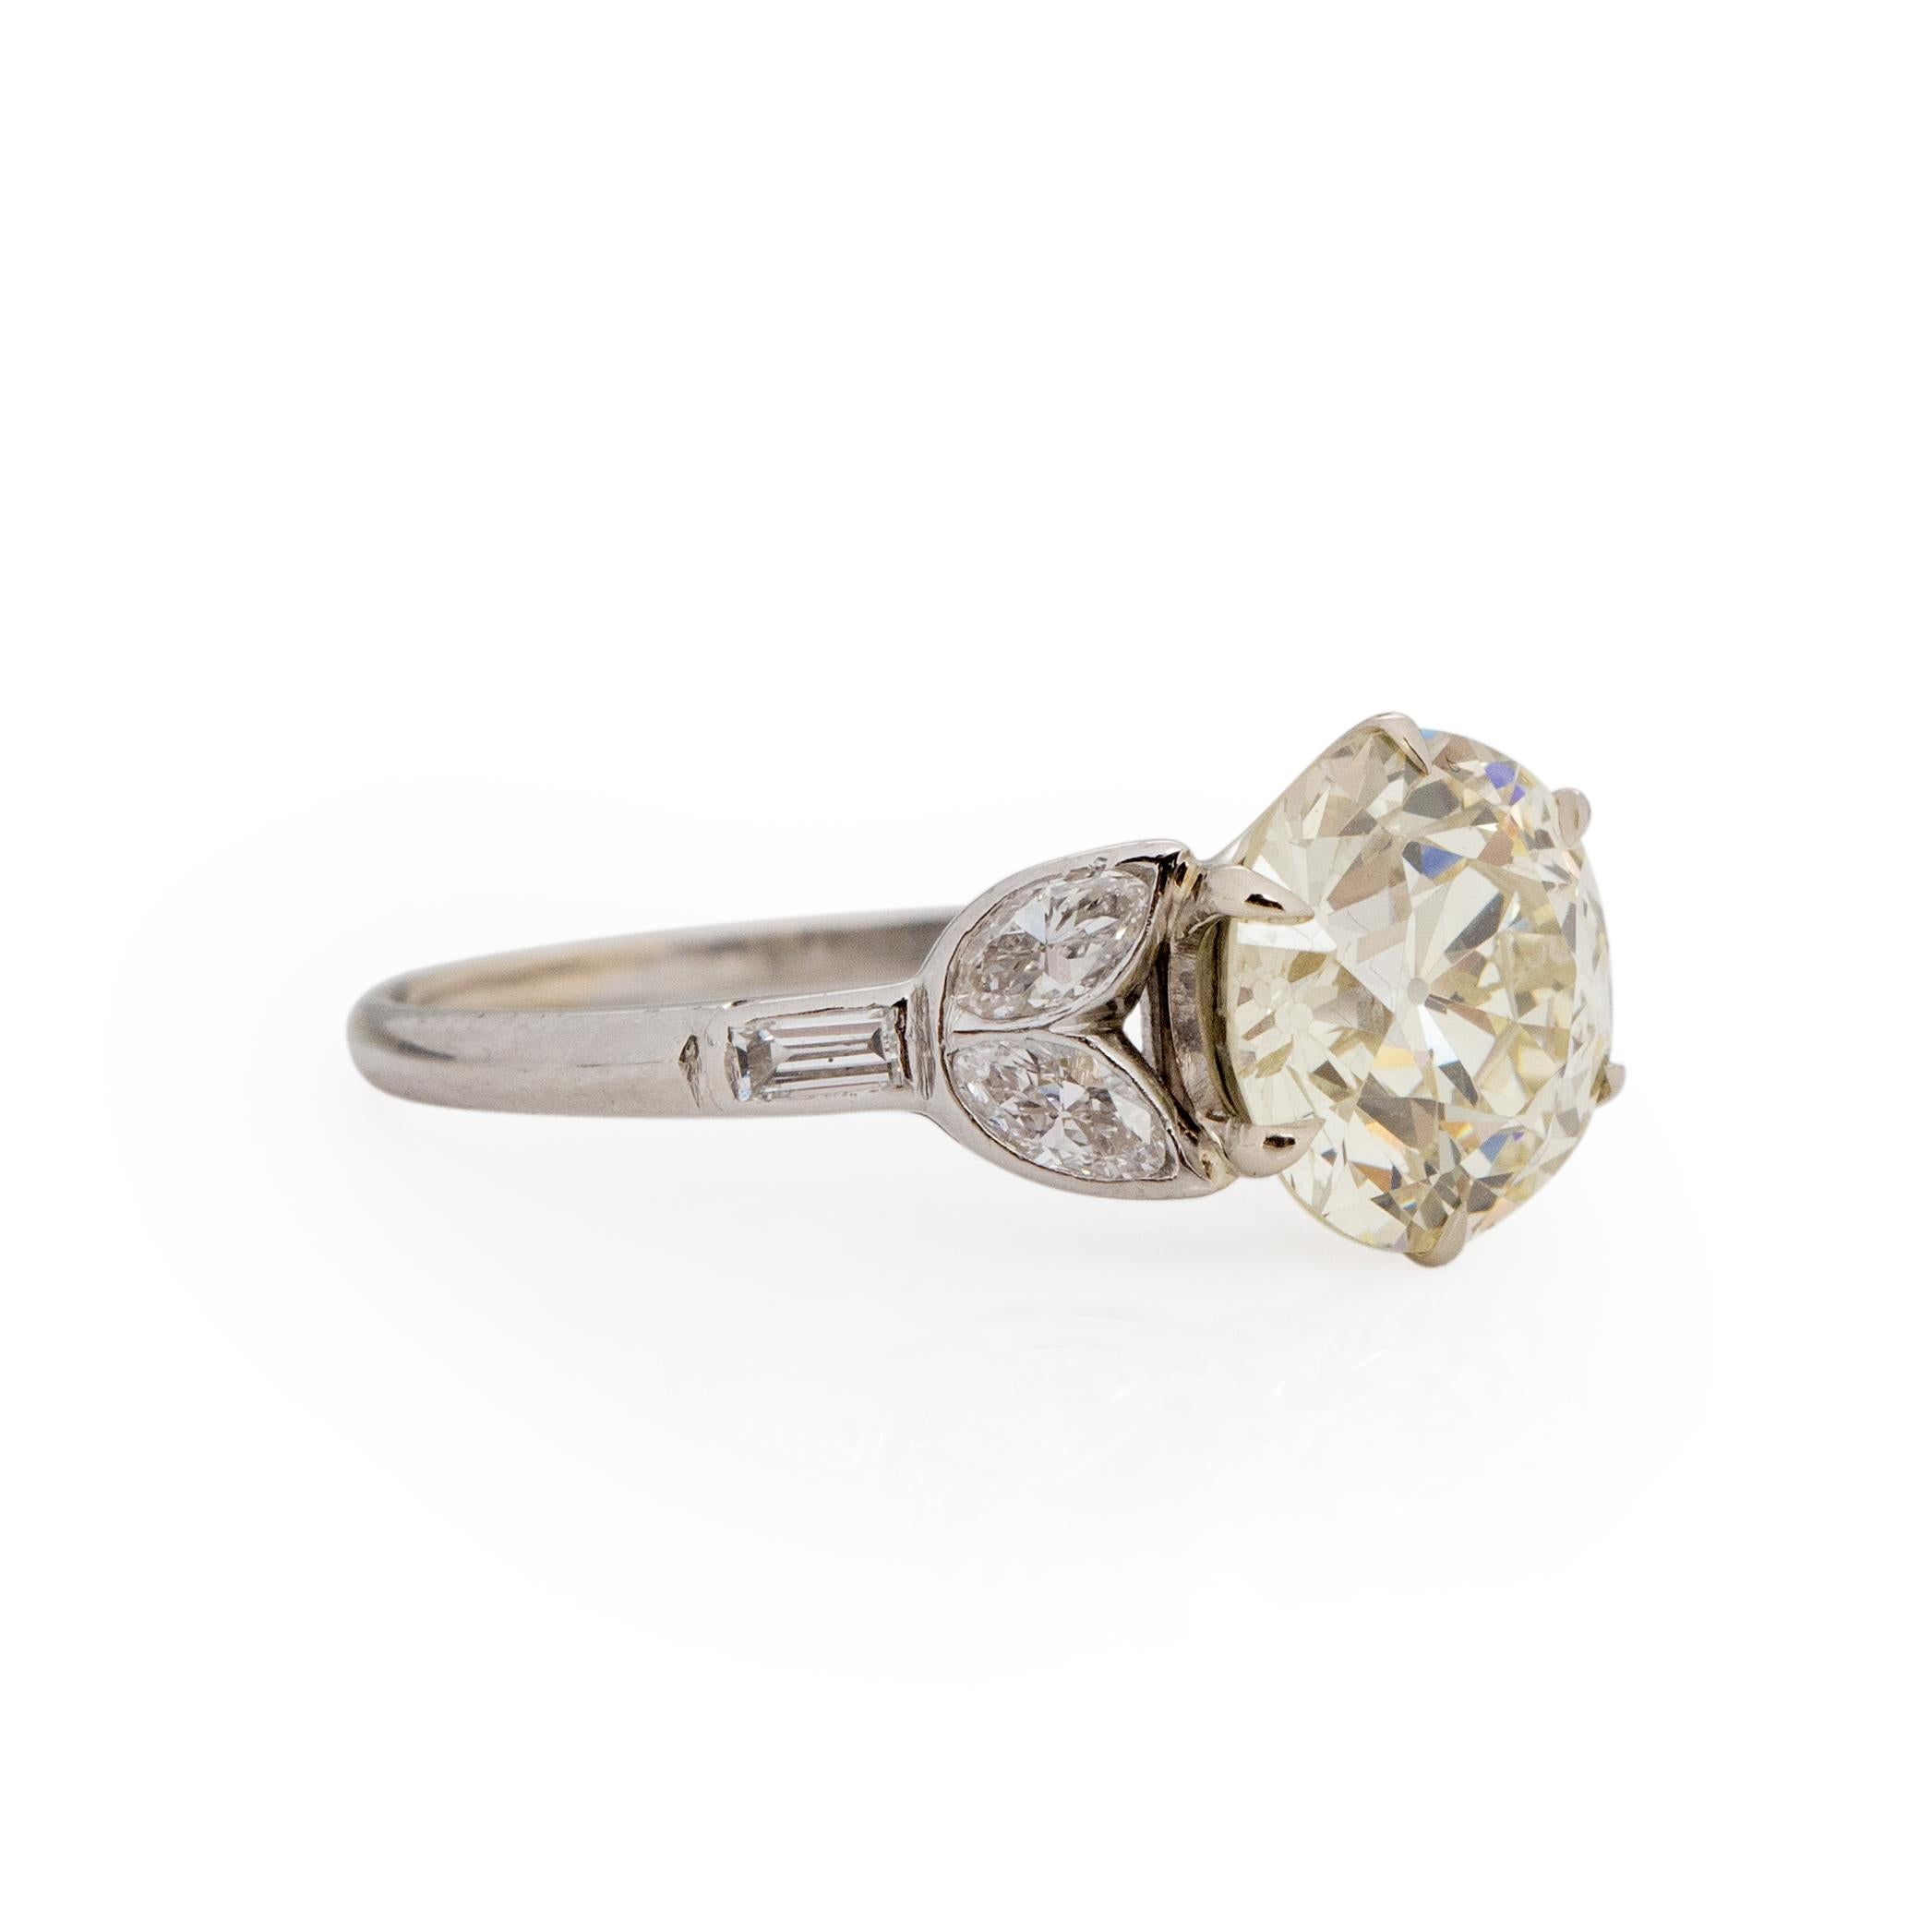 Here we have a beautiful flower motif art deco solitaire engagement ring. The outstanding 3 Ct old European cut diamond it held by a delicate leaf design that has four perfectly cut Marquee shape diamonds giving a split shank feel. Lengthening the